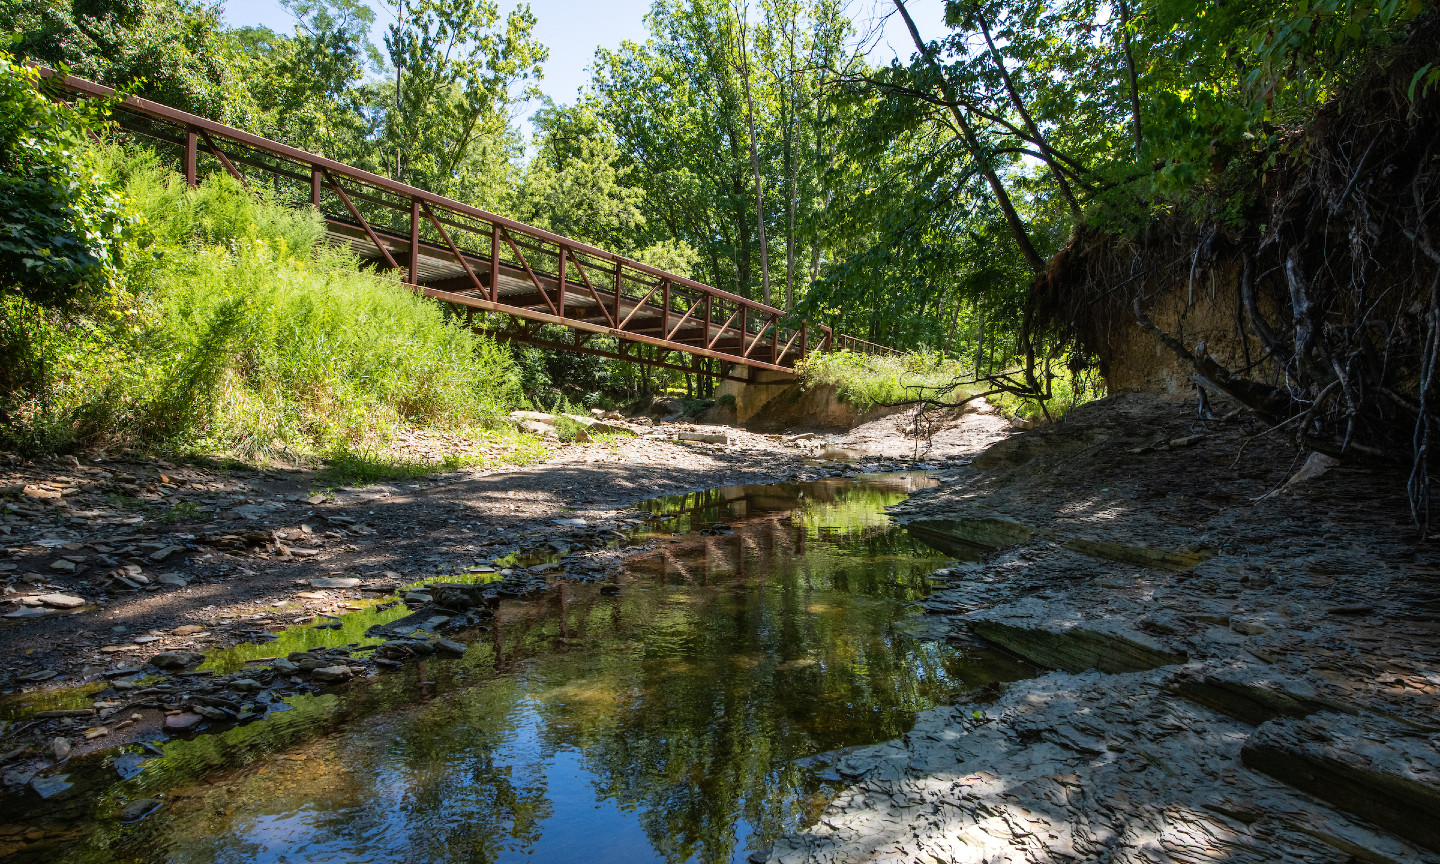 Cleveland Metroparks Overview and Resources